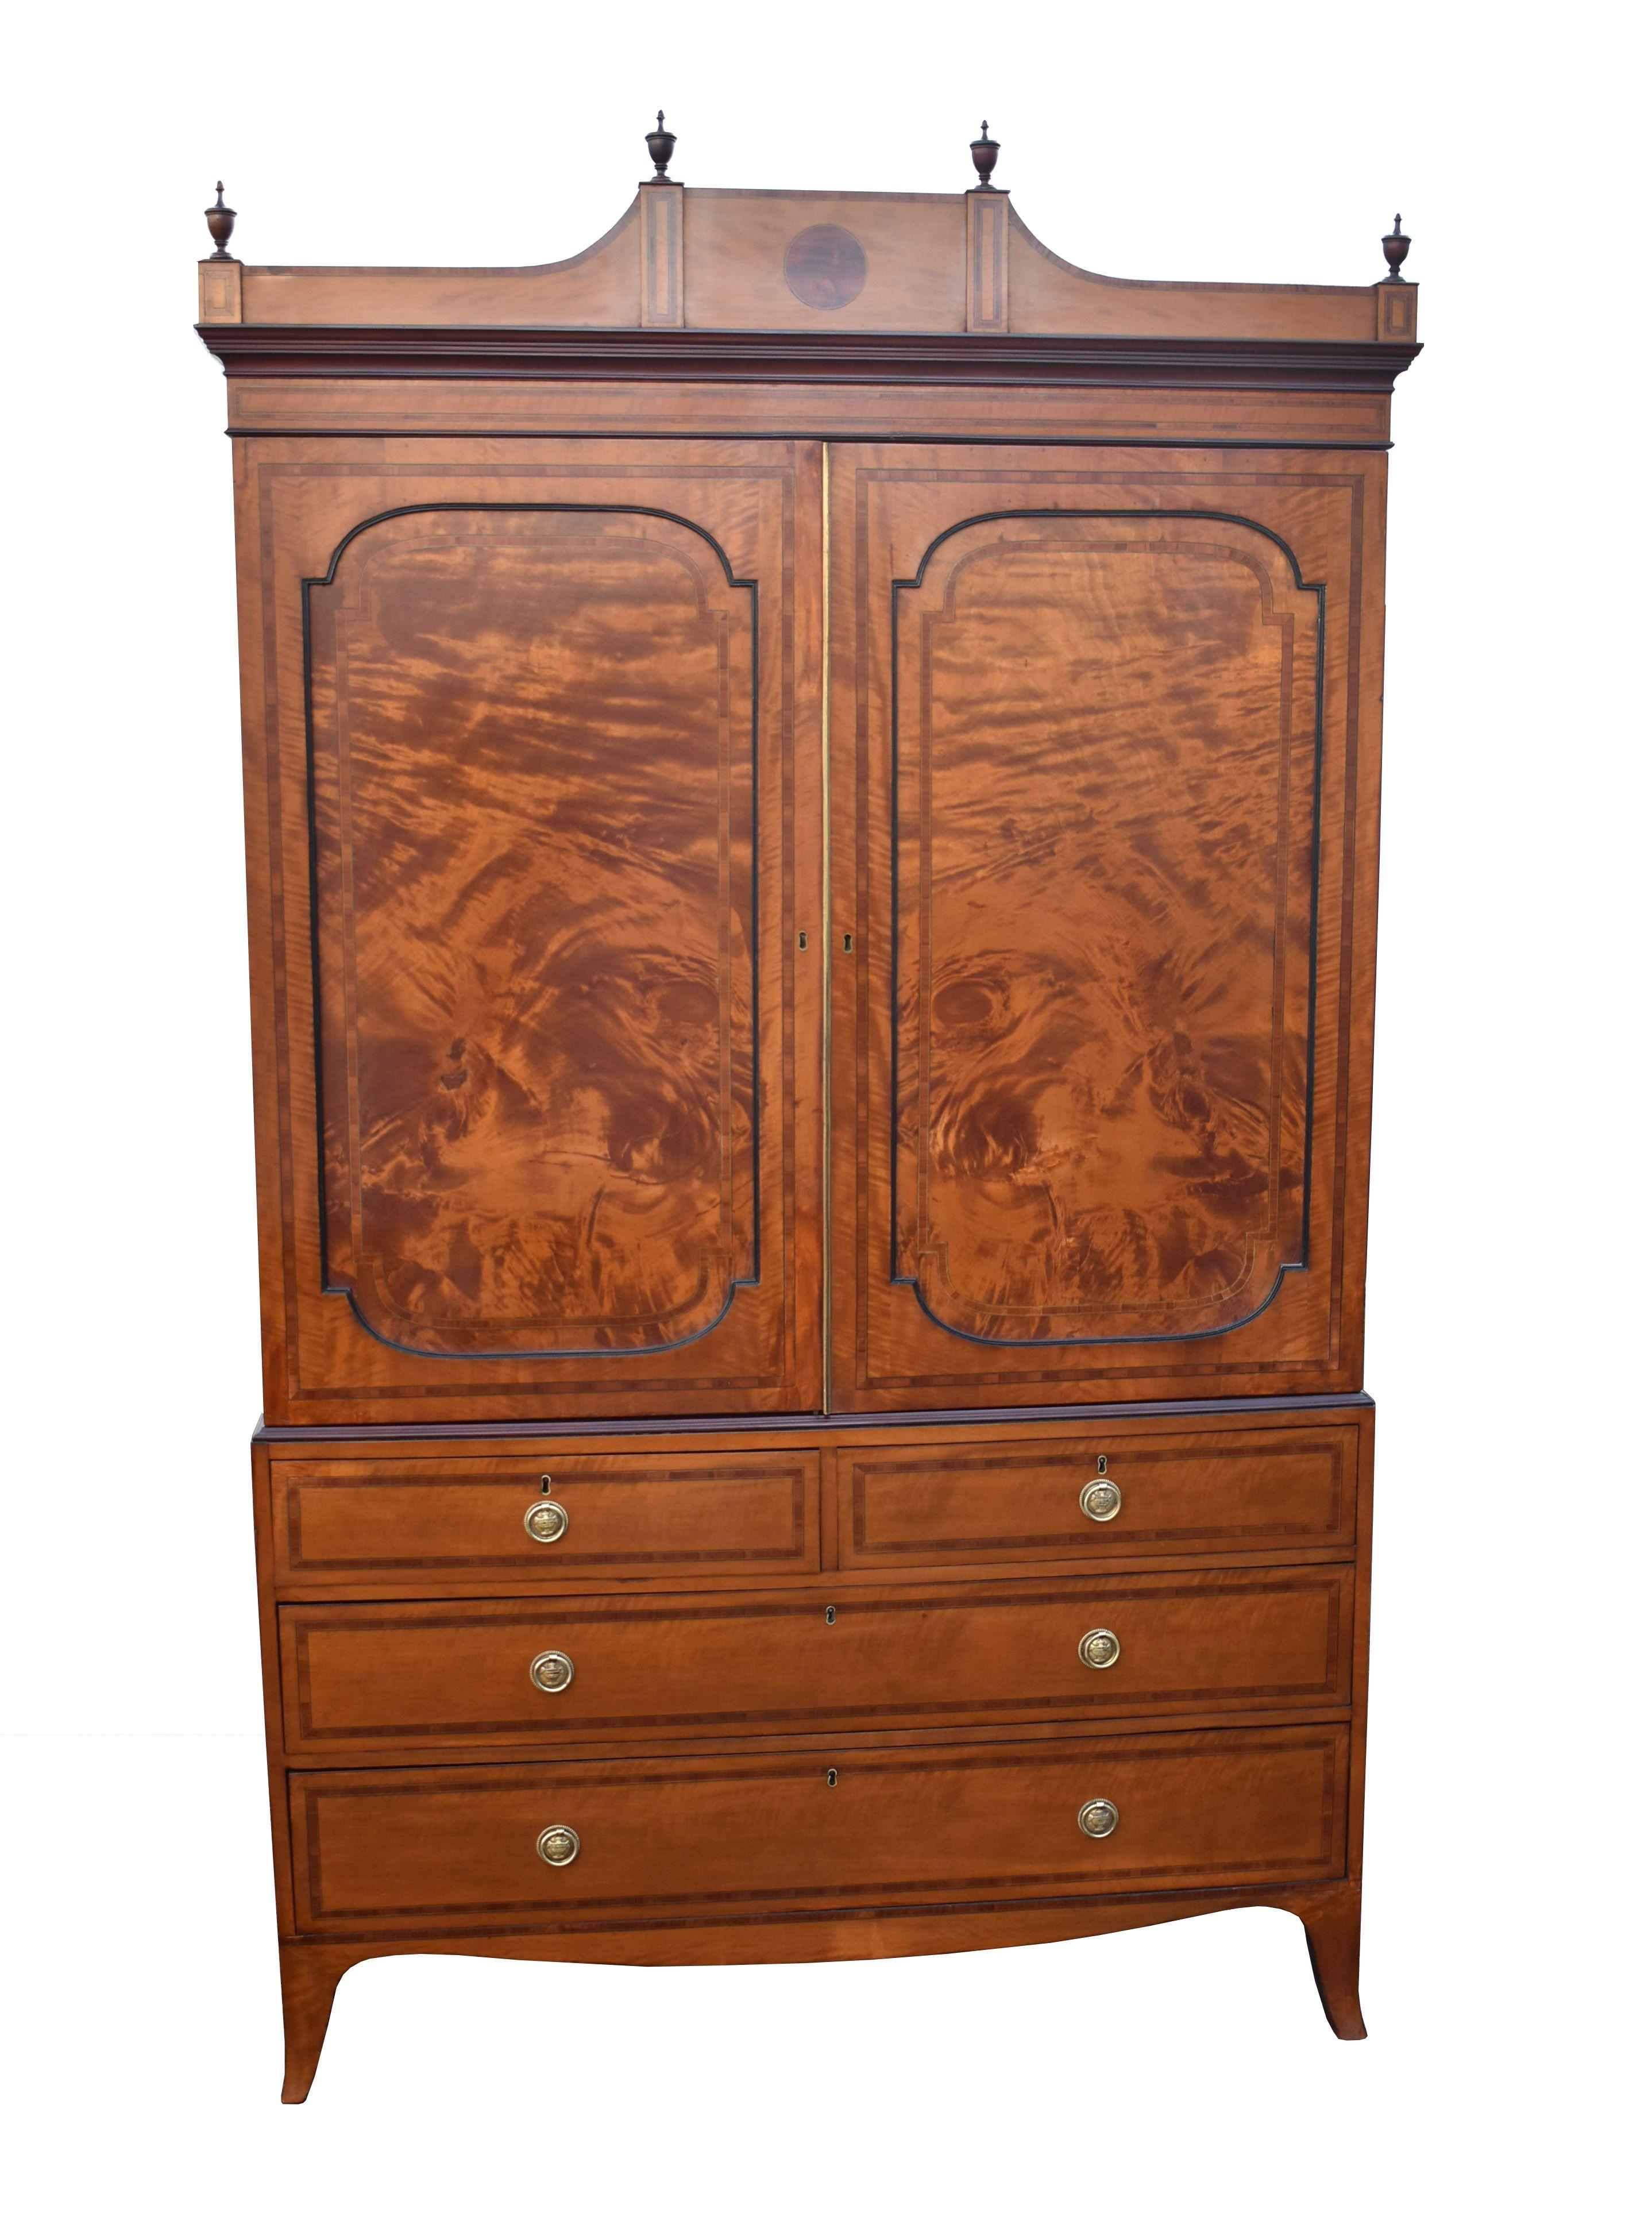 For sale is a top quality 19th century satinwood linen press, having an architectural pediment, urn finials, and two well figured panel doors enclosing original linen trays. The base is comprised of two short over two long drawers, banded with